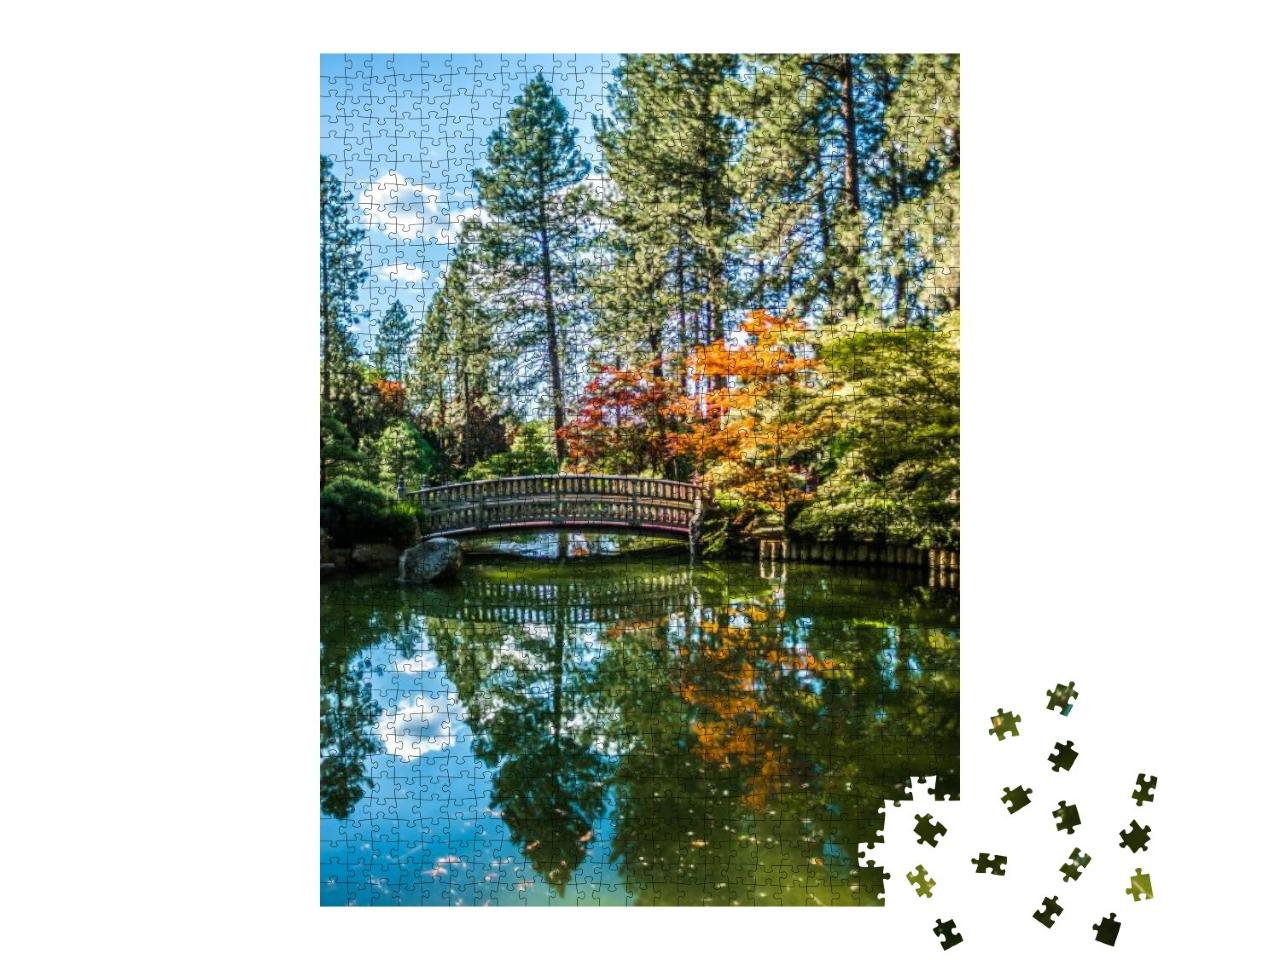 The Beautiful Japanese Garden At Manito Park in Spokane... Jigsaw Puzzle with 1000 pieces